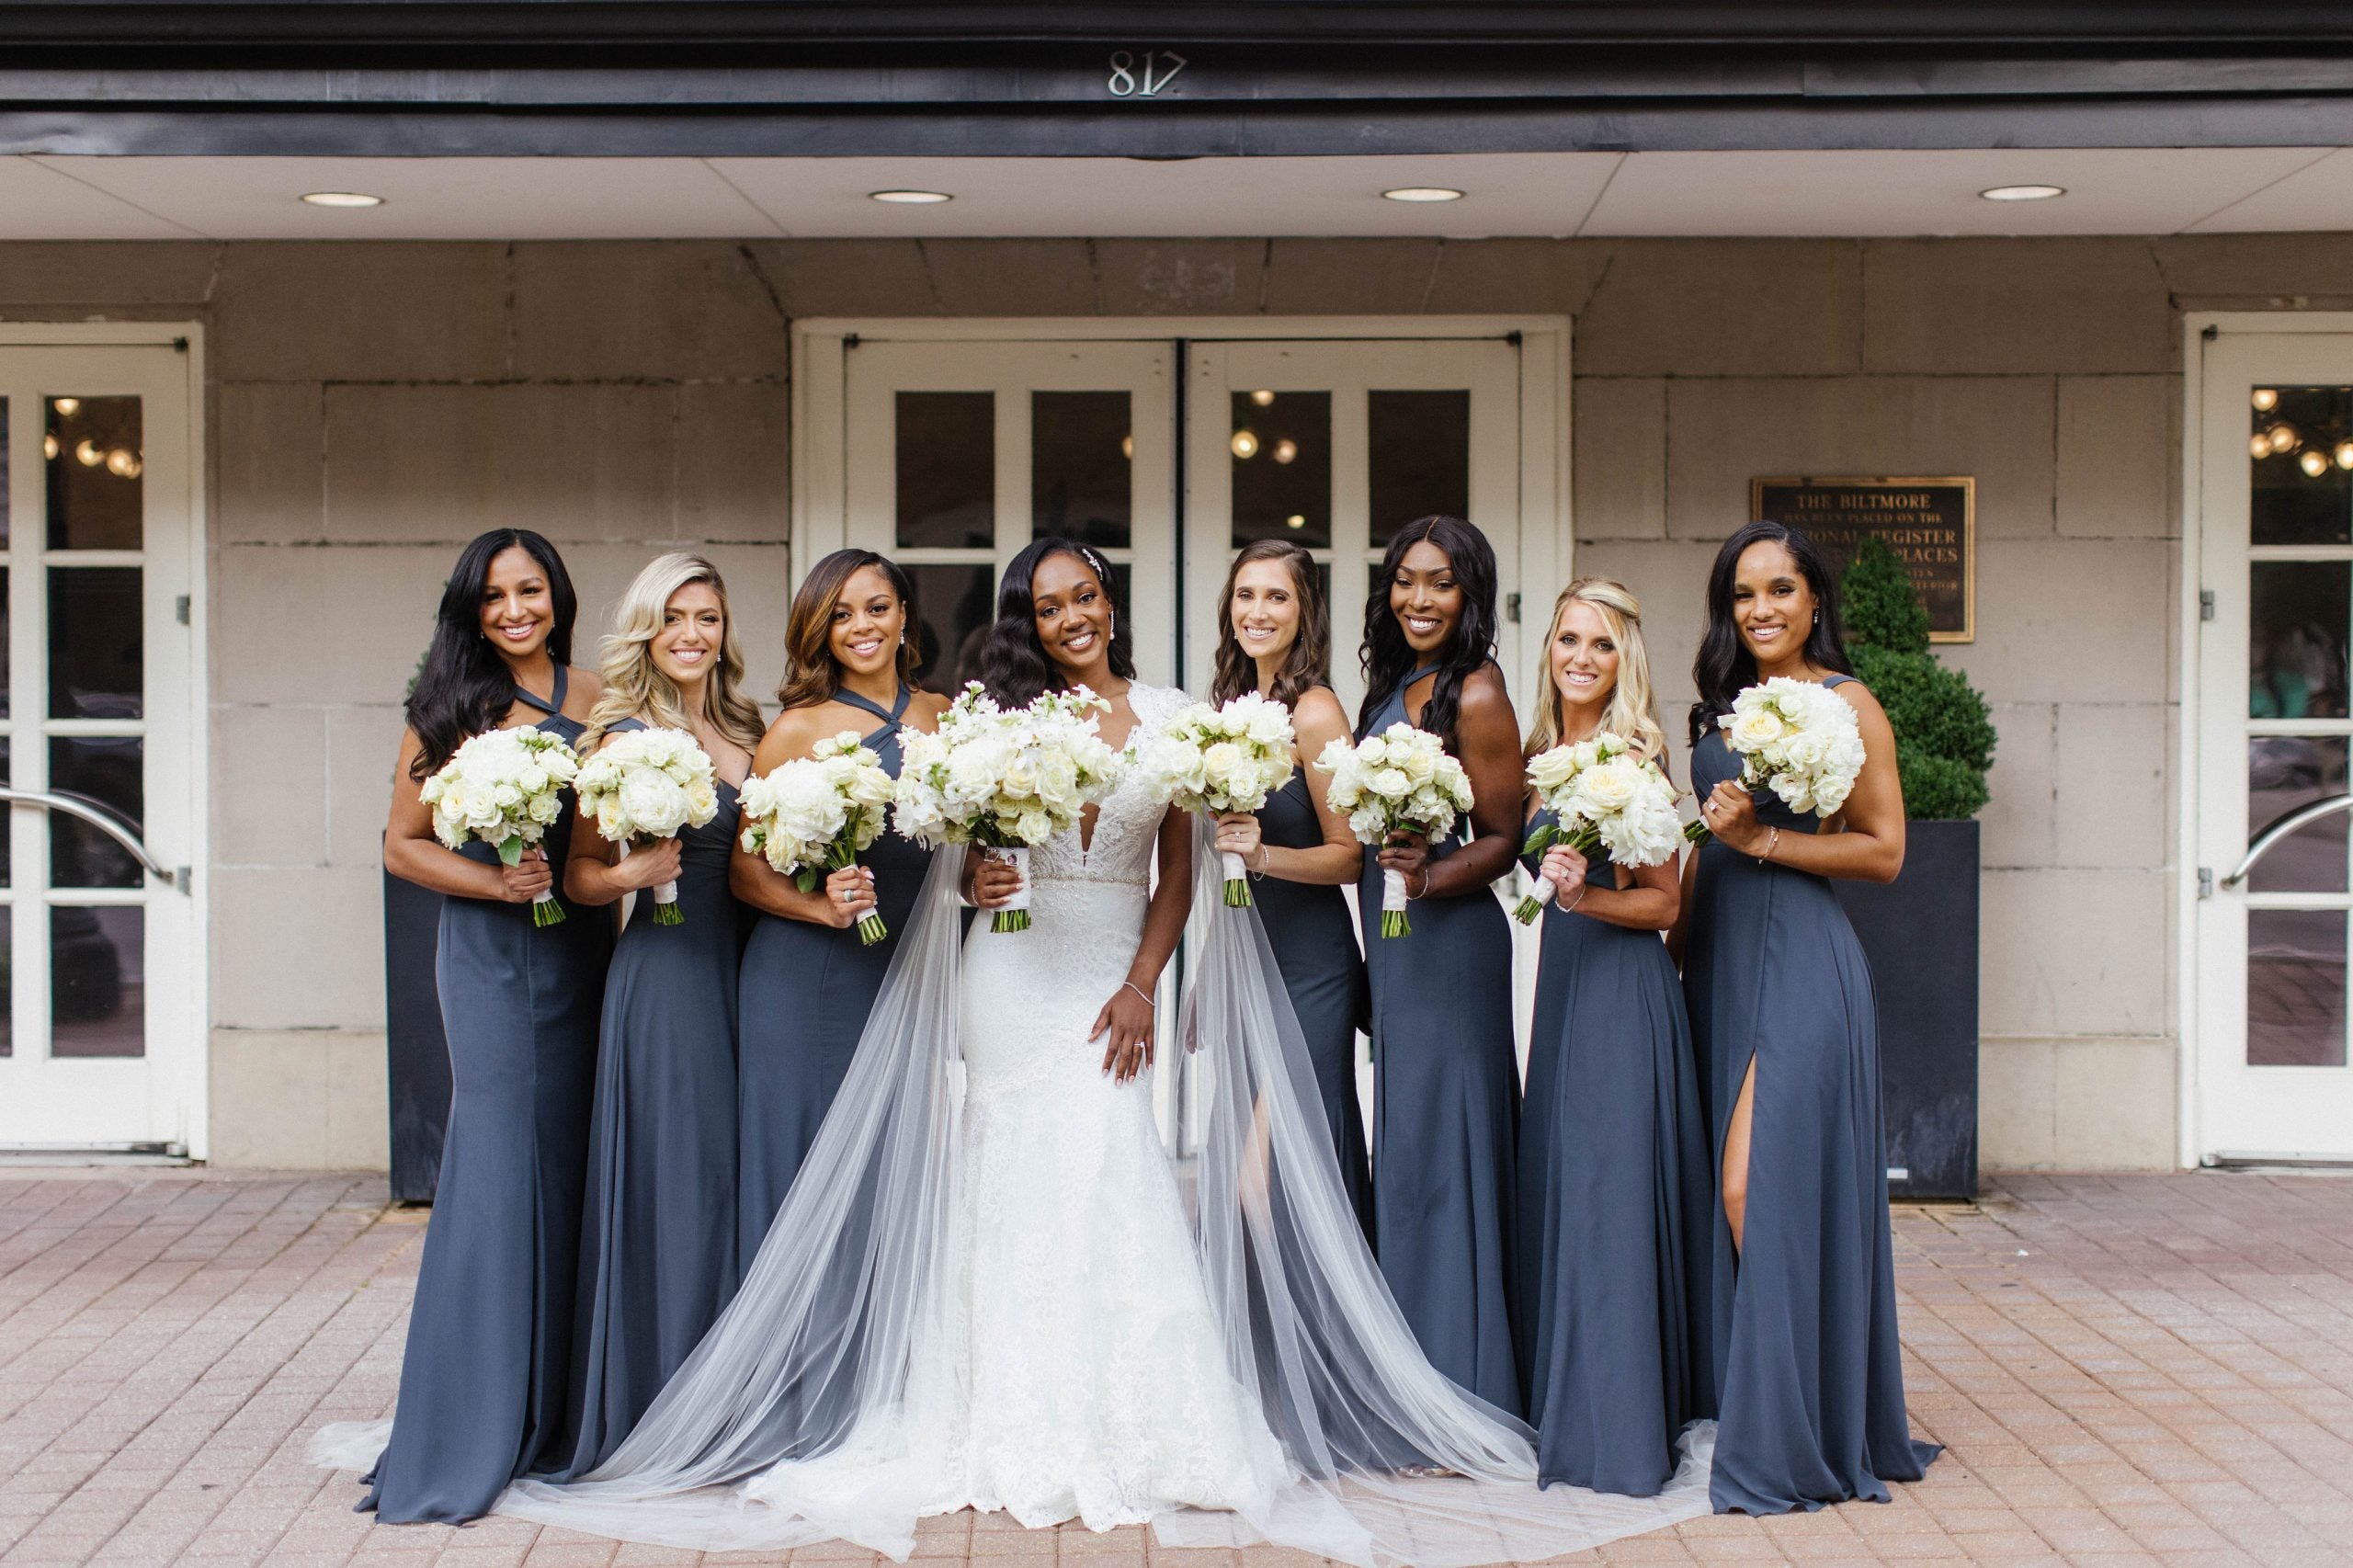 Bridal Bliss: Courtney And Torrey Said "I Do" In A Stunning Fourth of July Fête